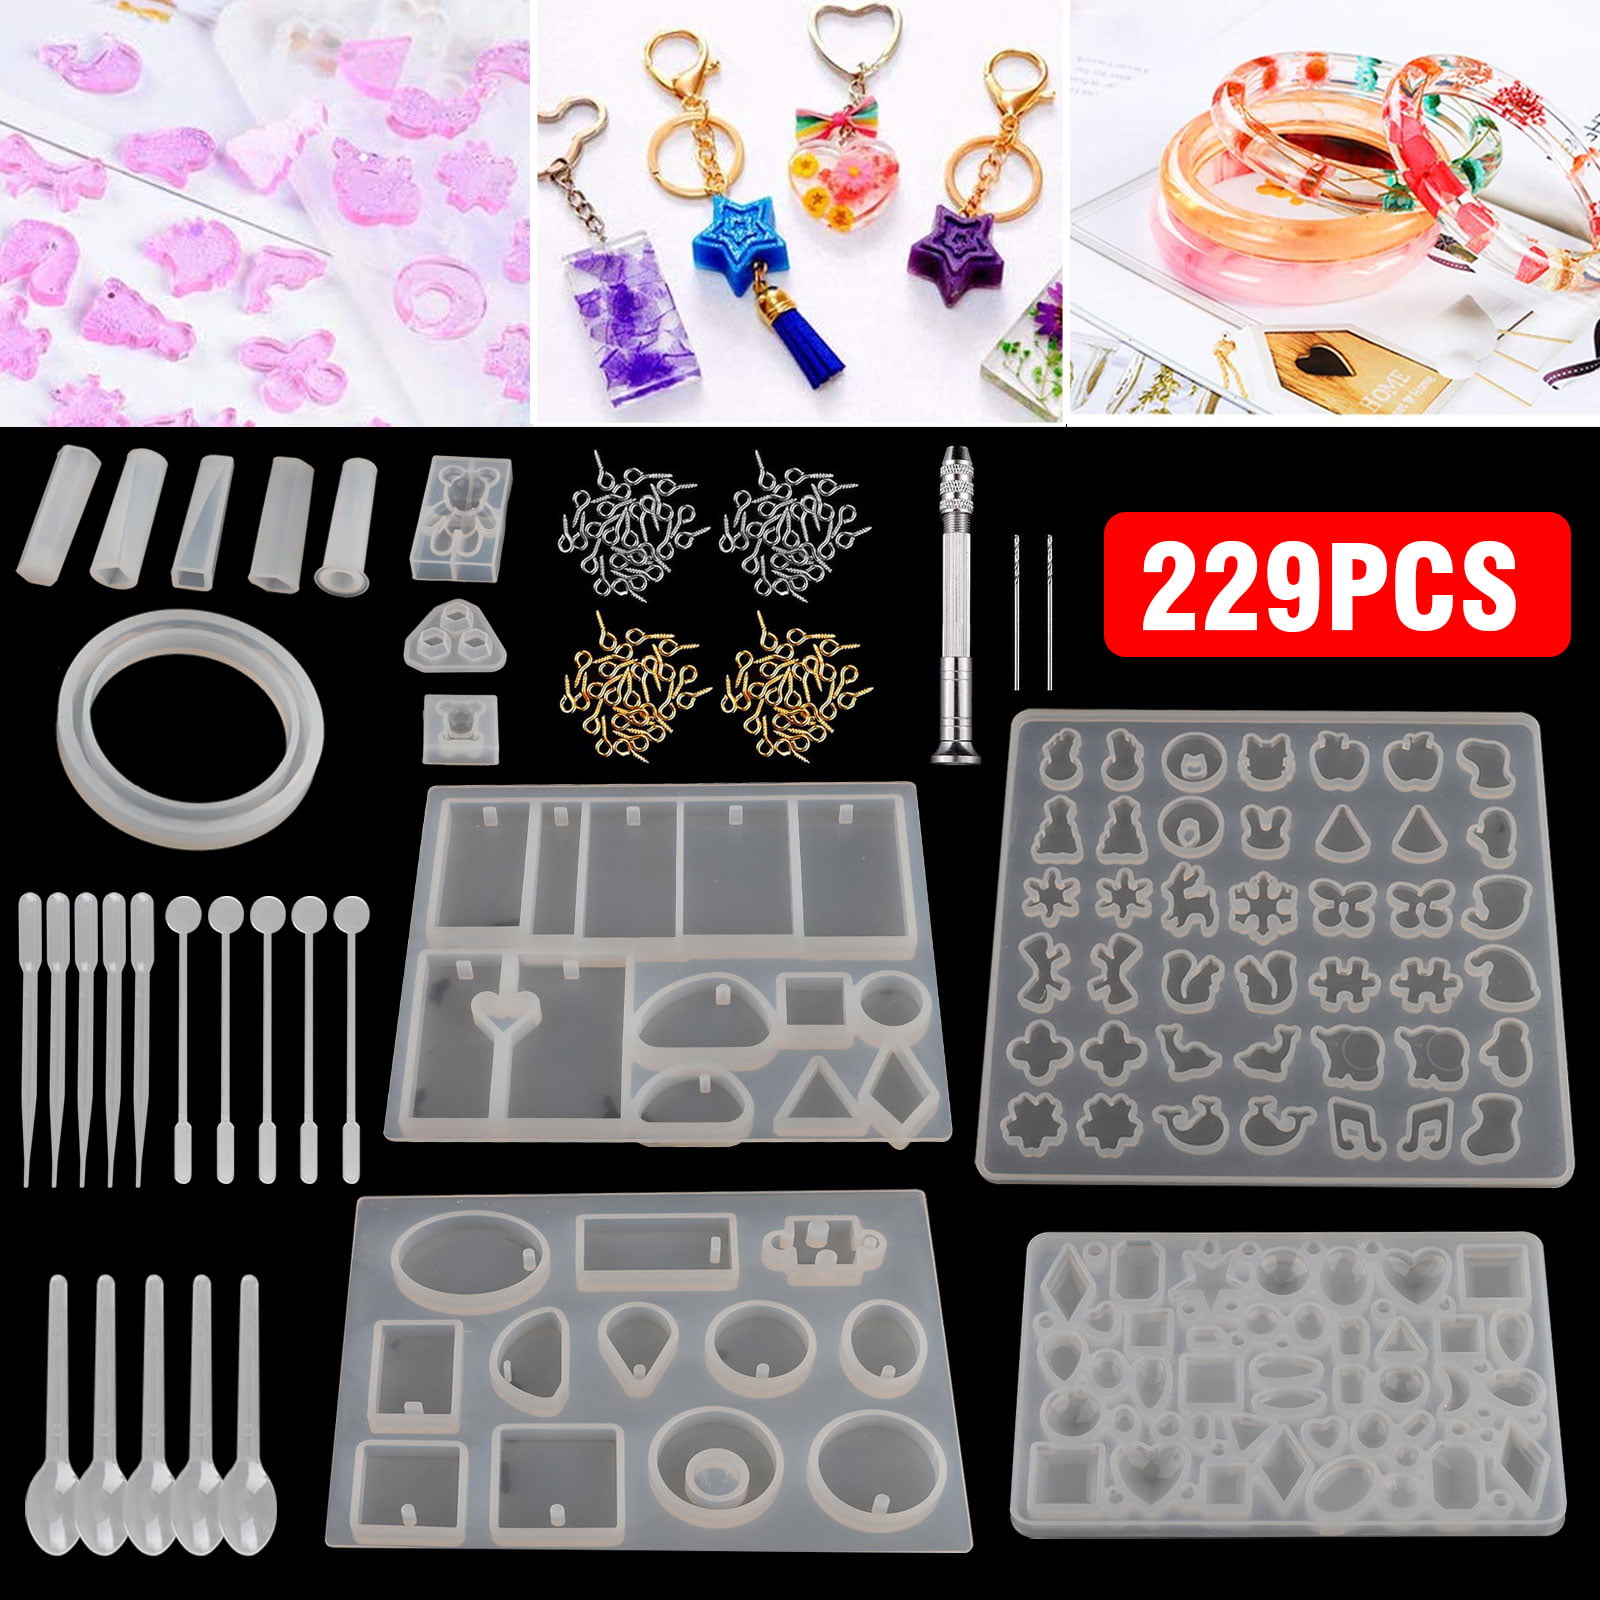 1 Silicone Resin Flower Mirror Mould,DIY Craft Casting Jewelry Pendant Necklace Epoxy Resin Tool Kit 